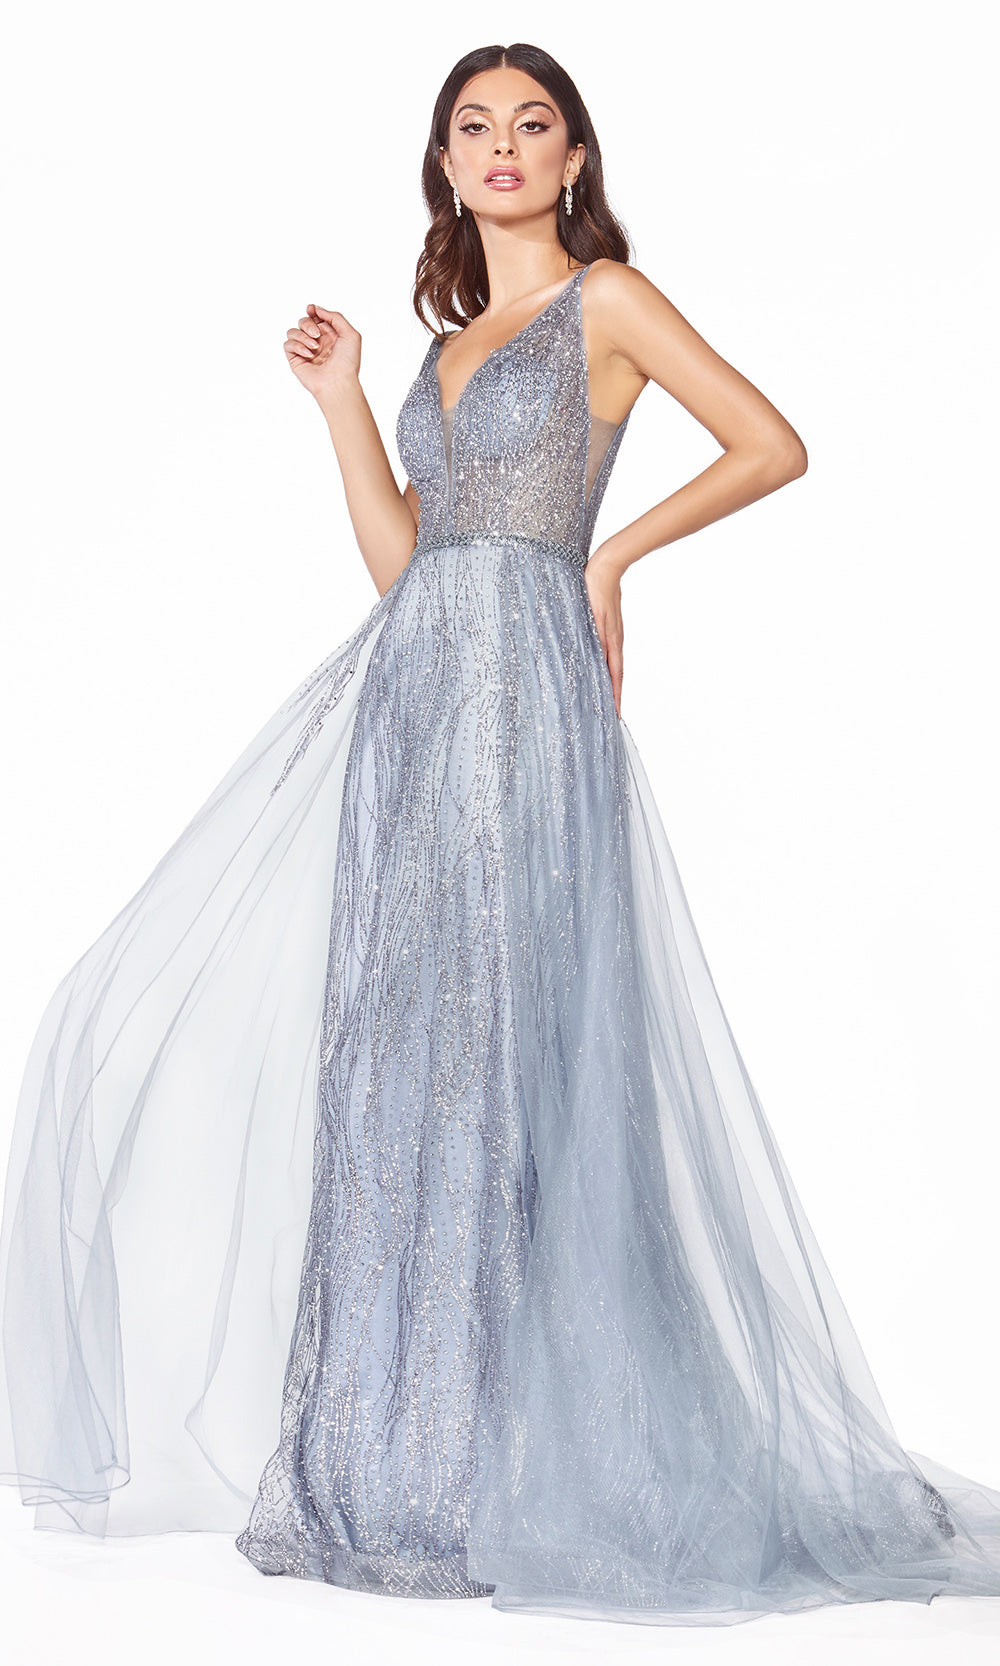 Cinderella Divine CD0152 dusty blue v neck dress wide straps skirt overlay Perfect dark blue dress for prom bridesmaids formal wedding guest dress gala black tie event wedding engagement reception beaded indowestern gown.Plus sizes avail.jpg